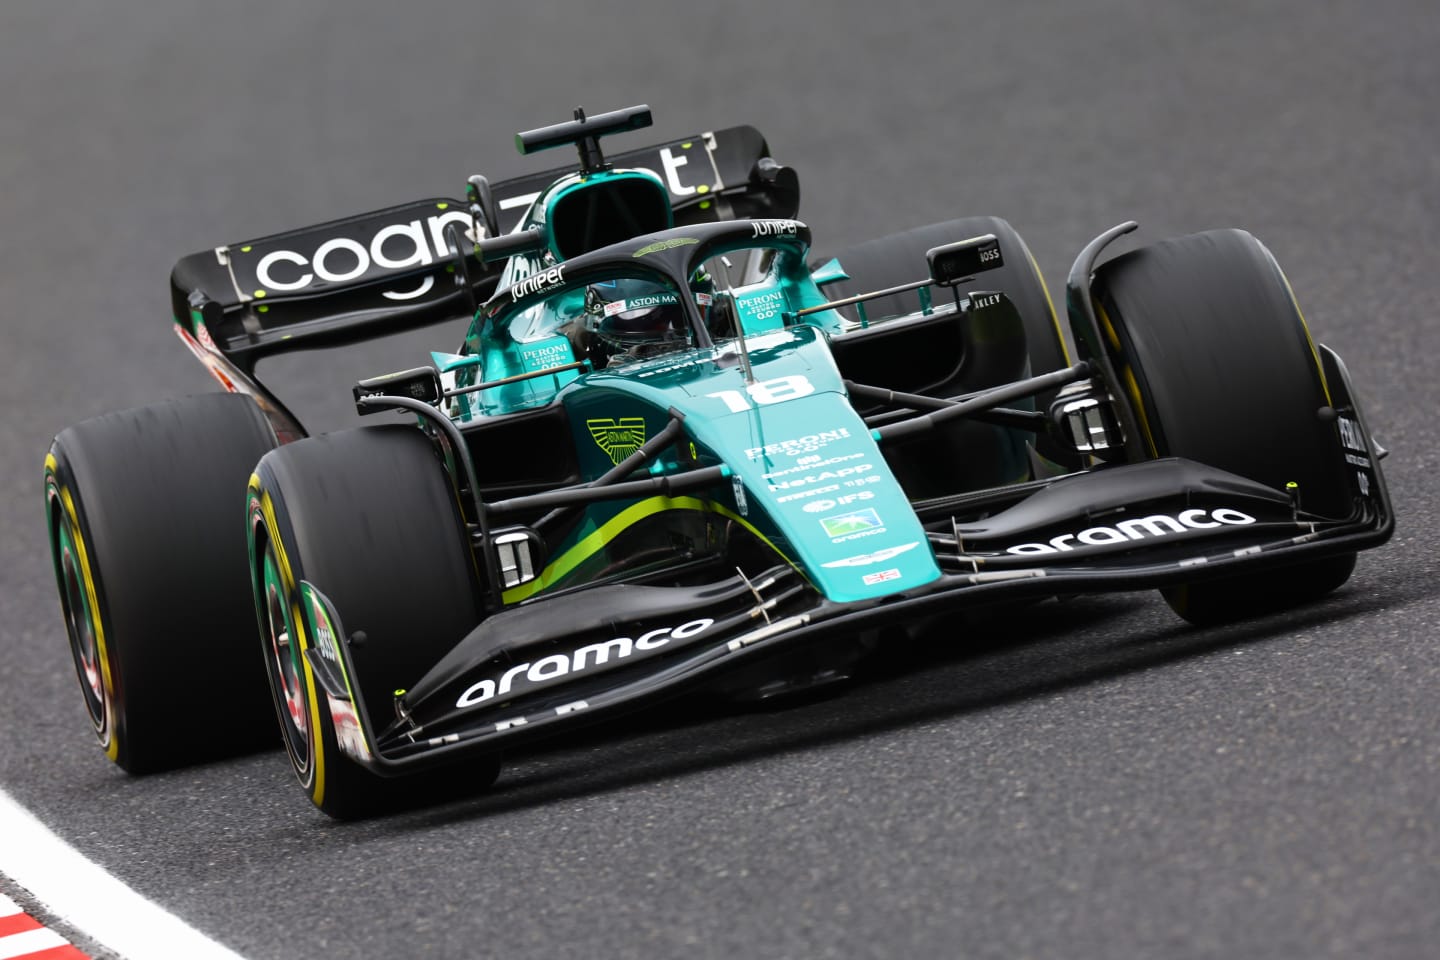 SUZUKA, JAPAN - OCTOBER 08: Lance Stroll of Canada driving the (18) Aston Martin AMR22 Mercedes on track during final practice ahead of the F1 Grand Prix of Japan at Suzuka International Racing Course on October 08, 2022 in Suzuka, Japan. (Photo by Mark Thompson/Getty Images )